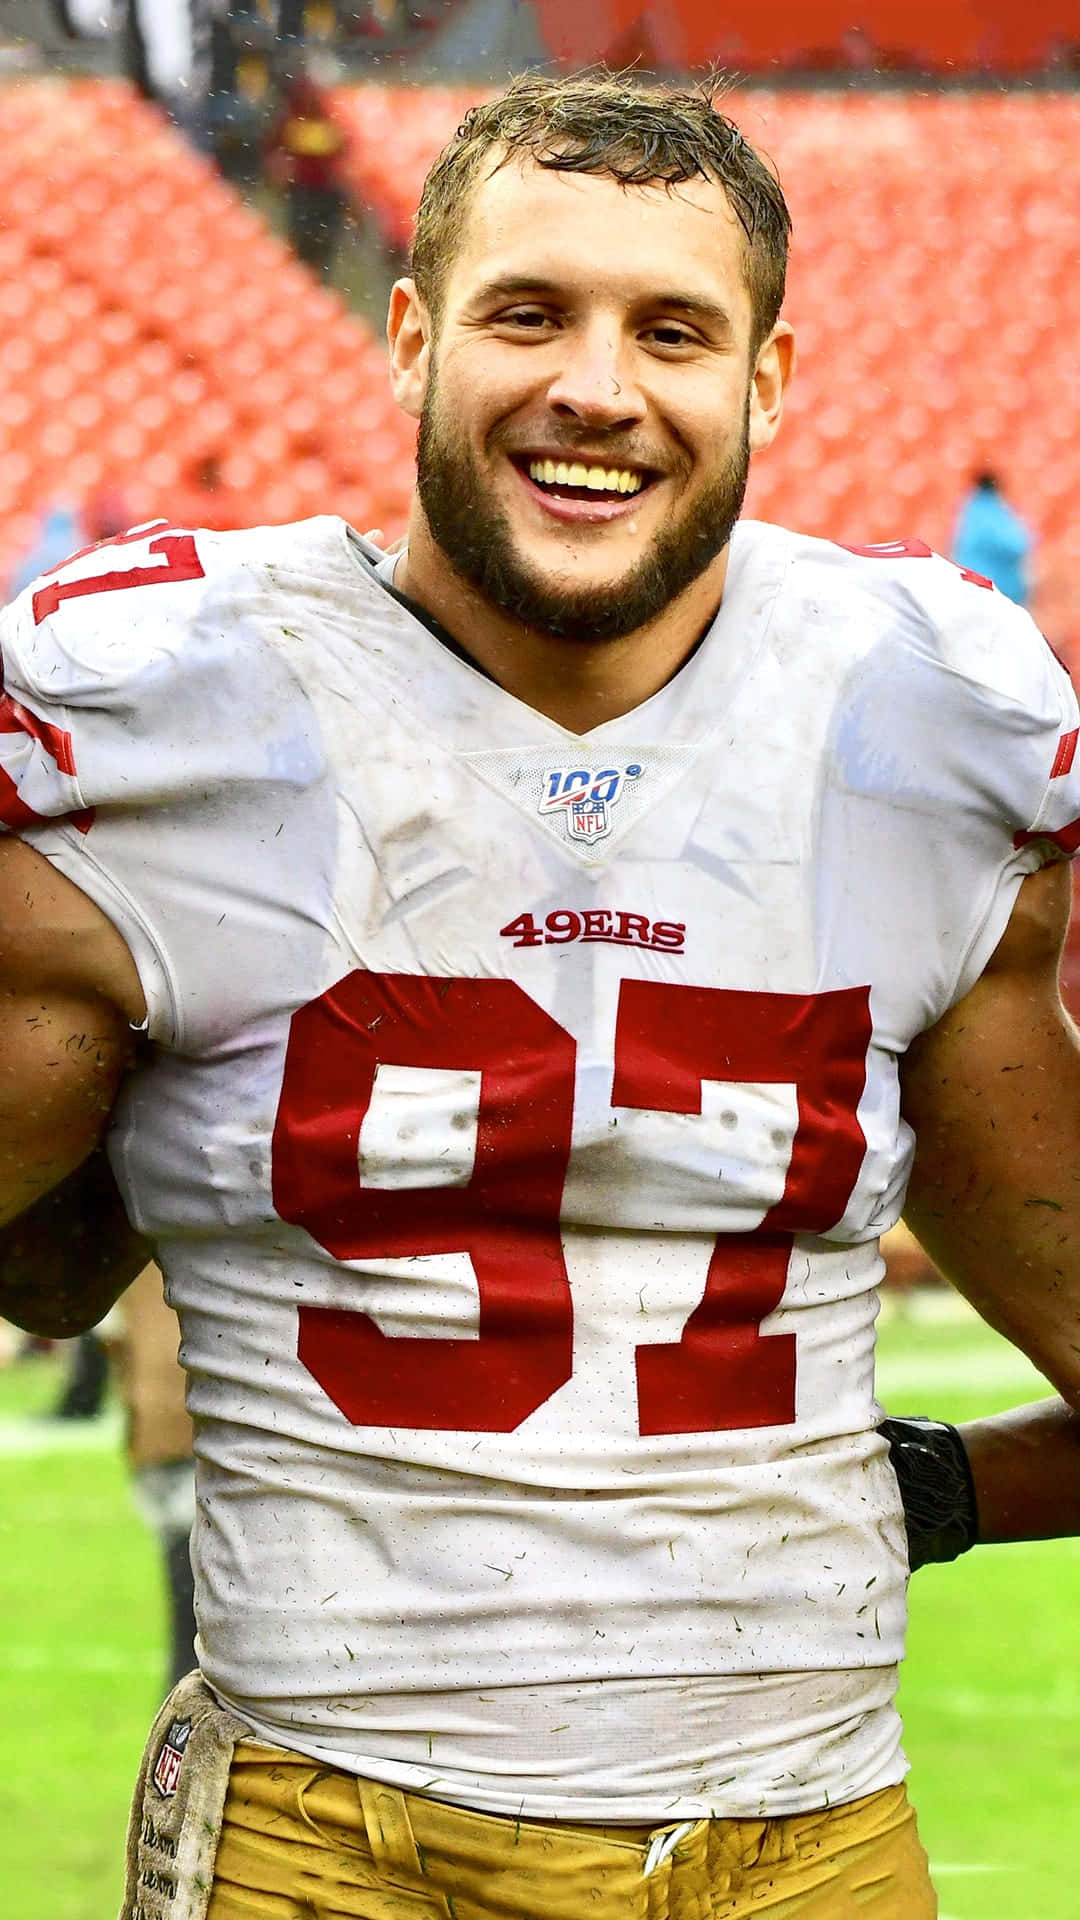 Nick Bosa making a game-changing tackle in the 2019 NFL season Wallpaper